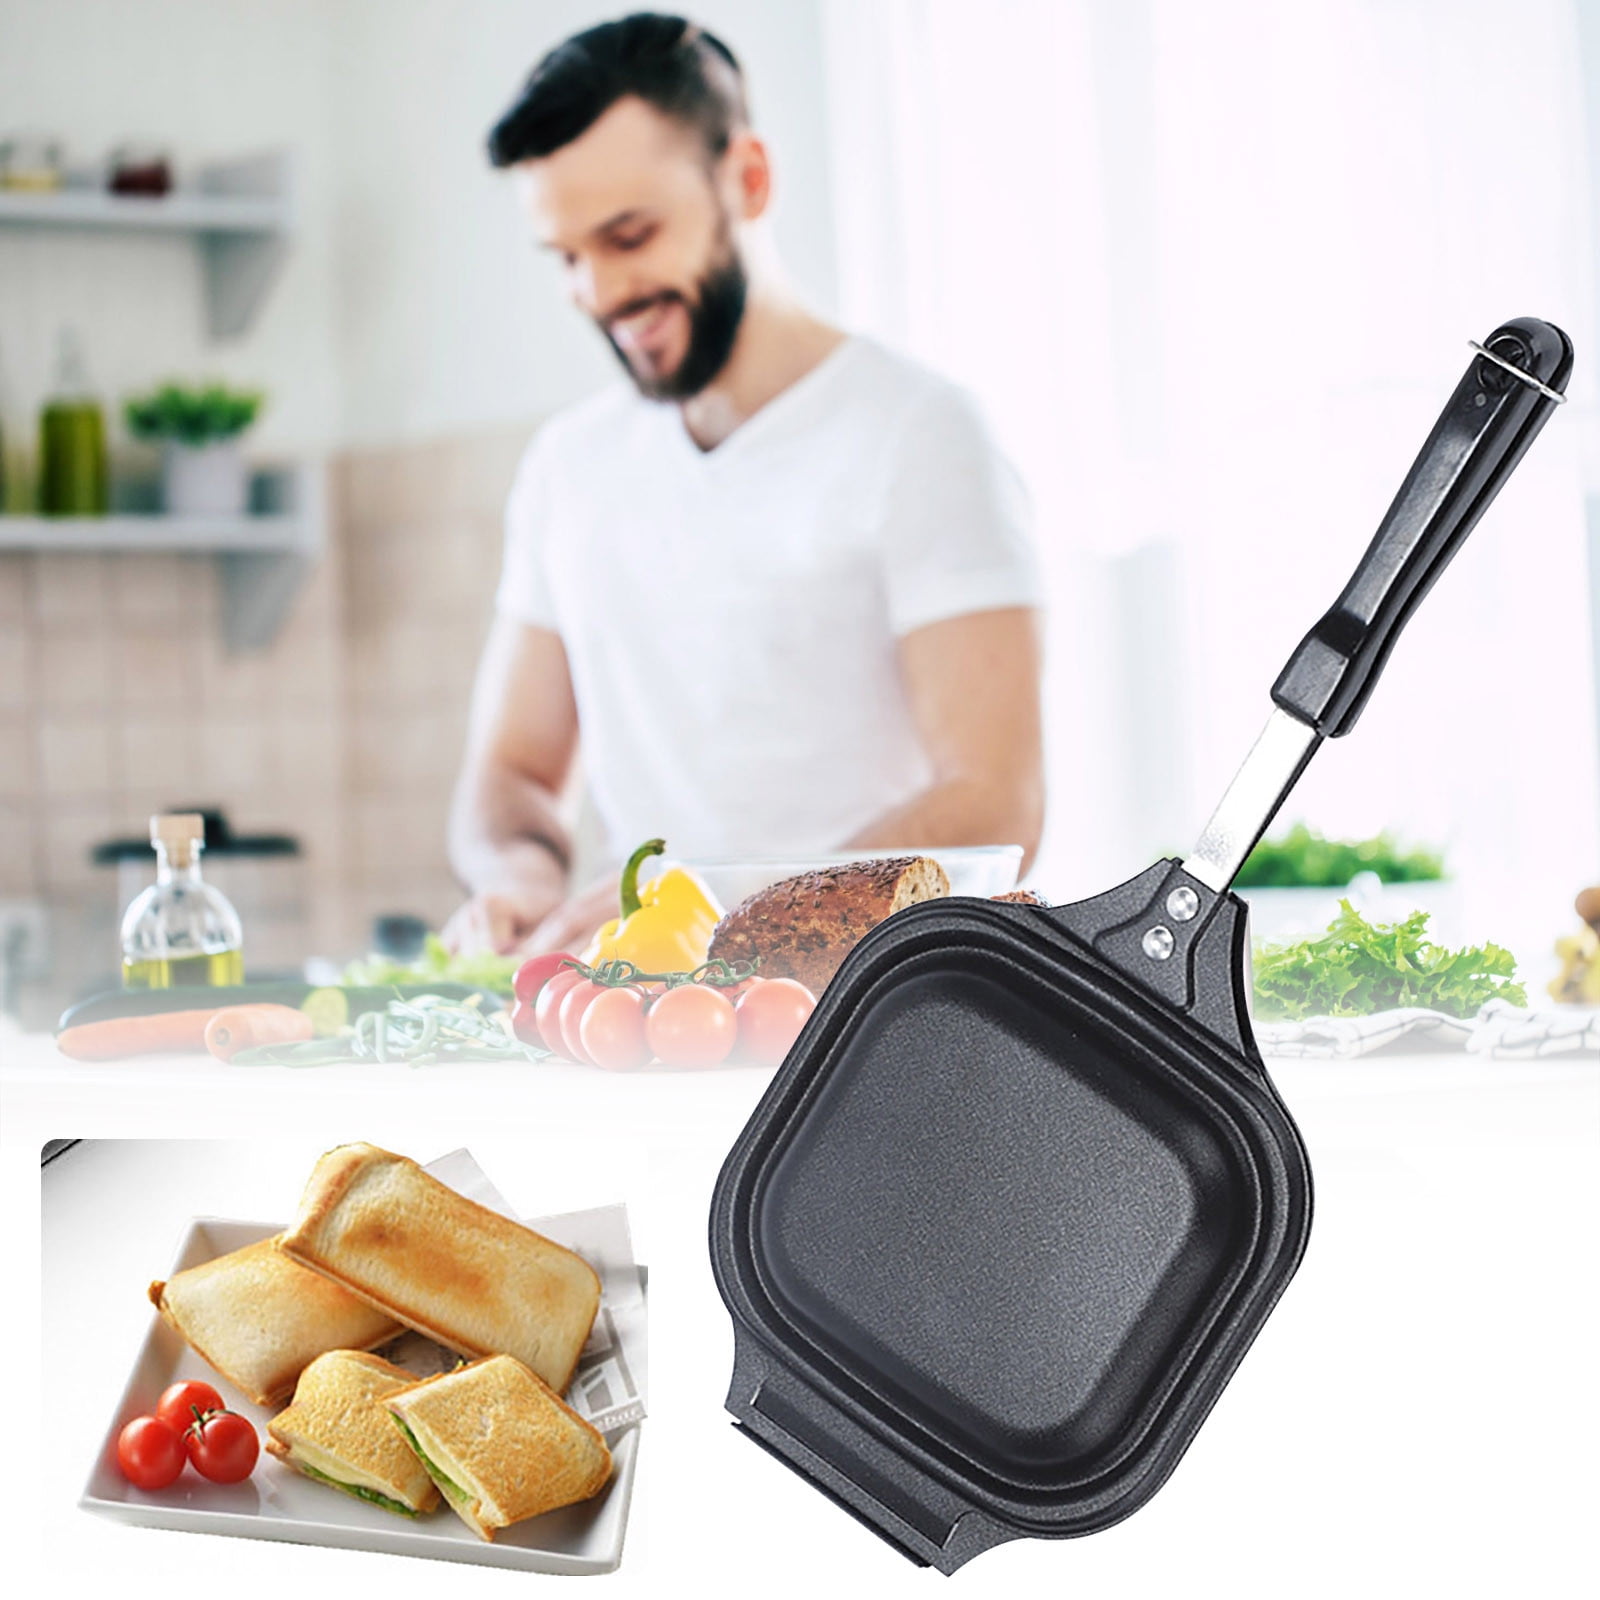 Electric kitchen appliances and utensils for making breakfast on